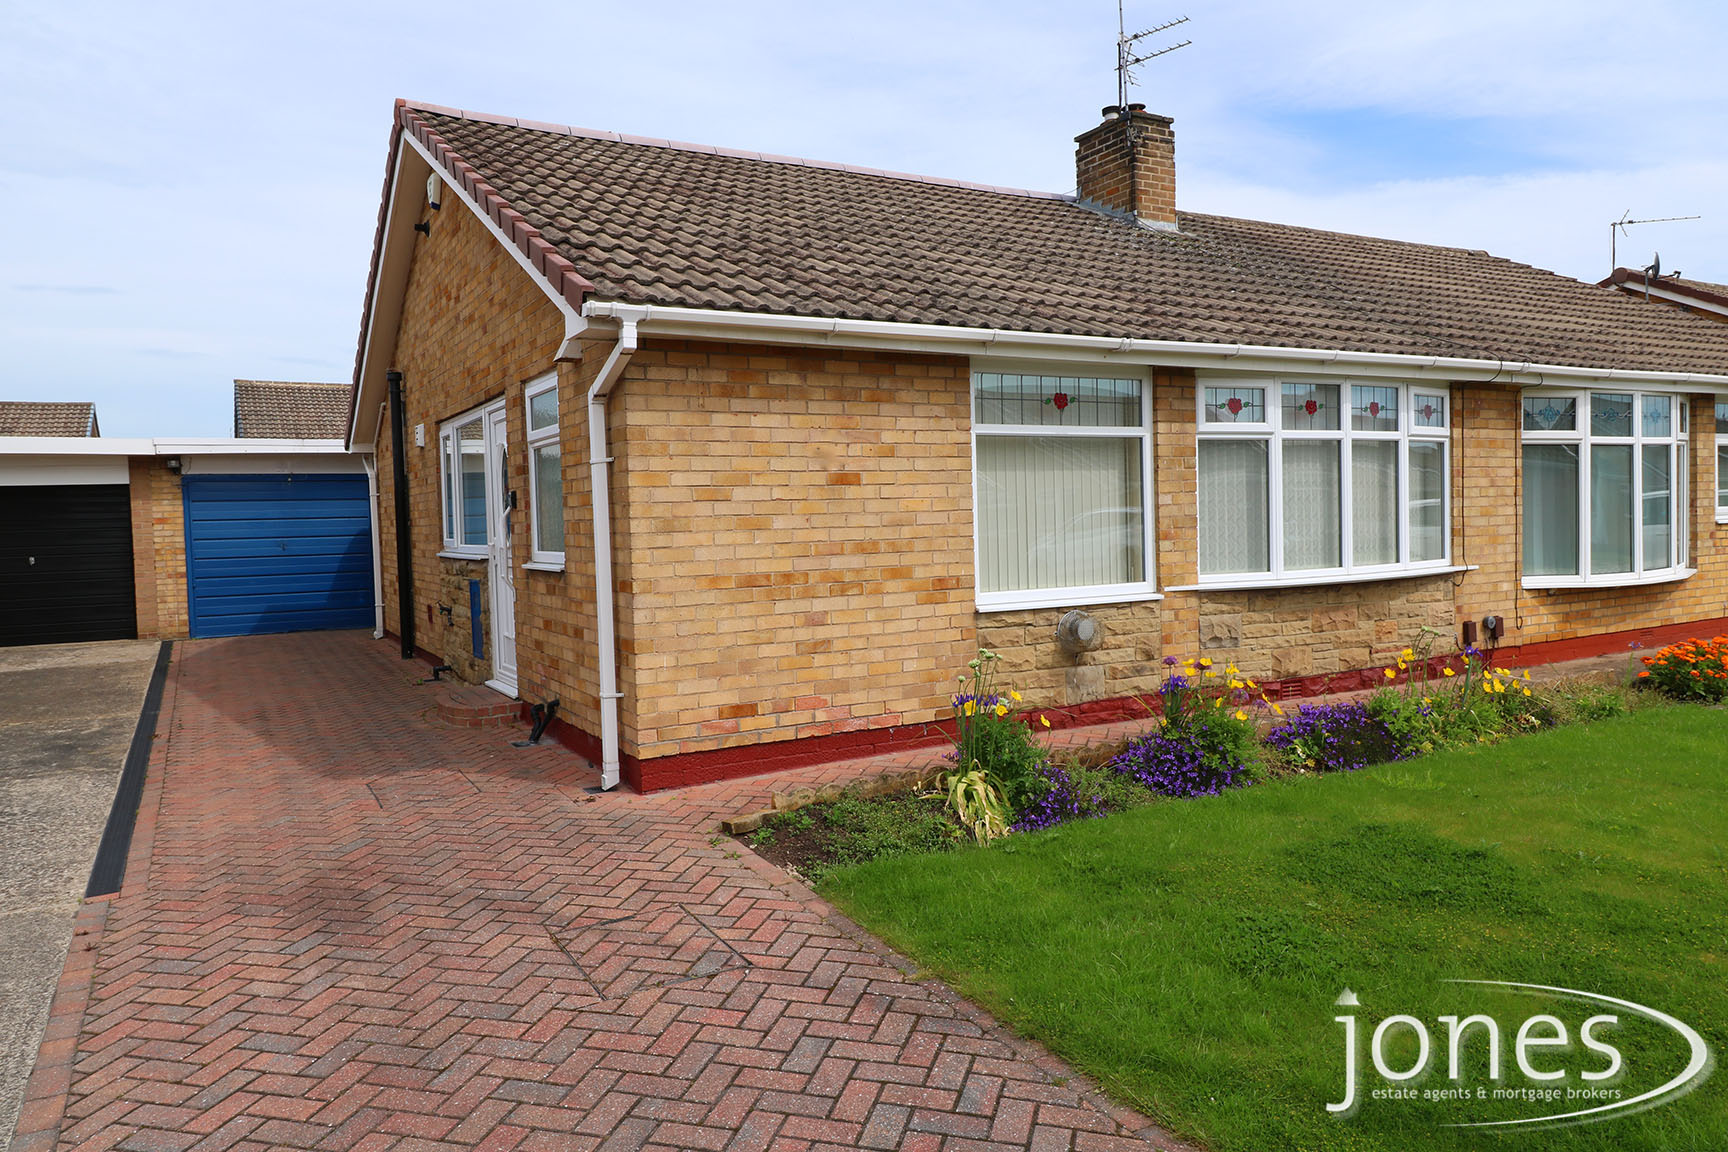 Home for Sale Let - Photo 01 Sycamore Road, Stockton on Tees, TS19 0NB